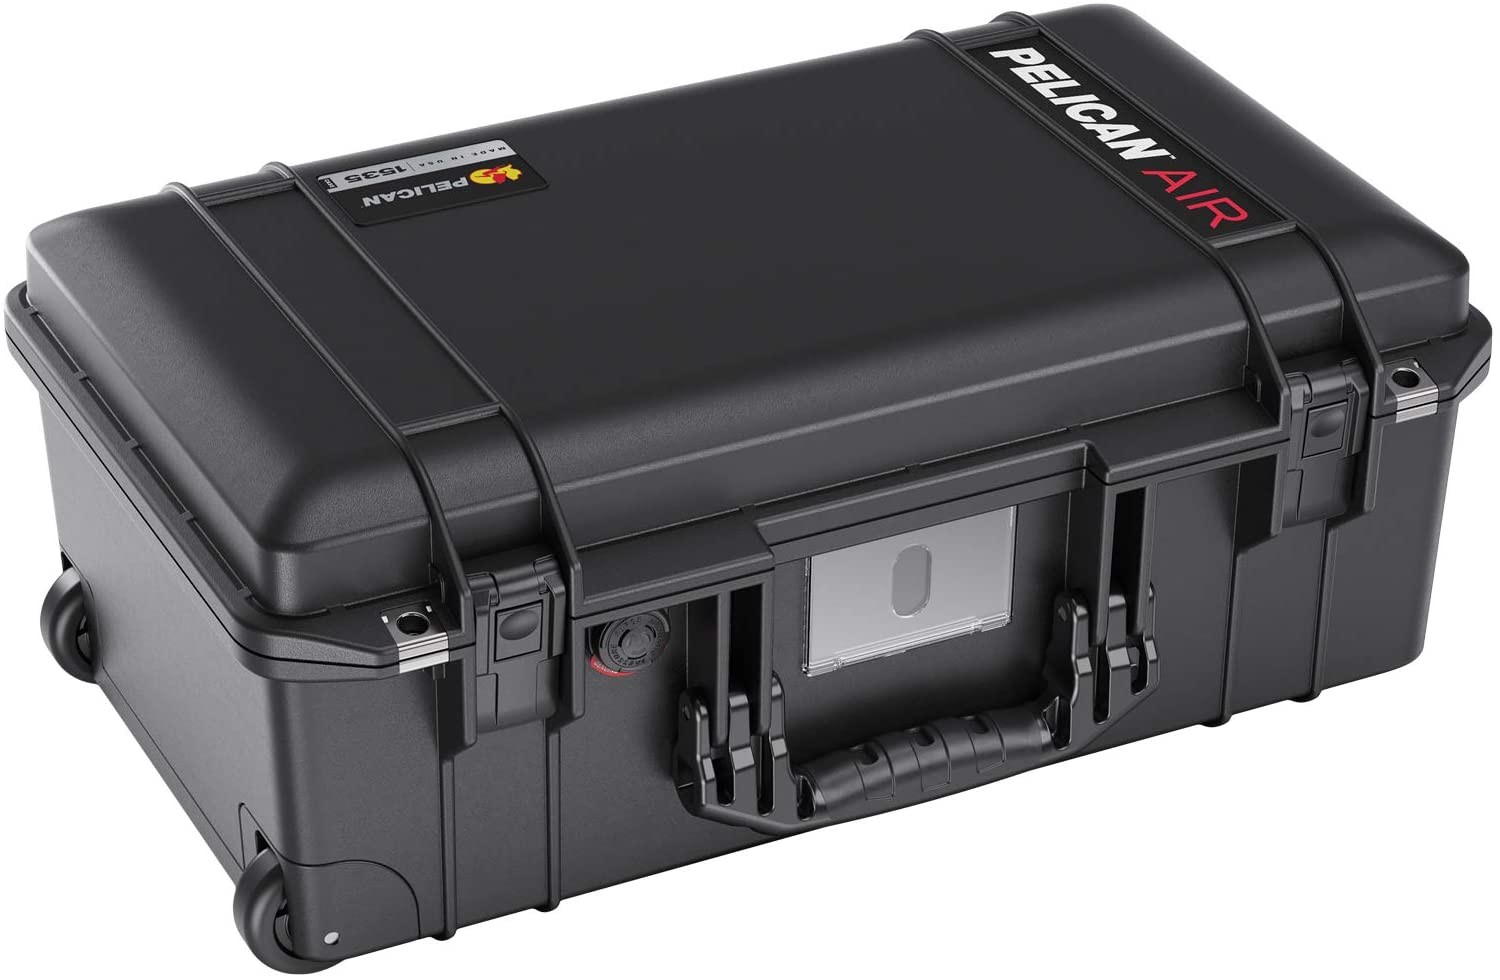 Pelican Air 1535 Case With Foam 2020 Edition Push Button Latches Black 015350-0002-110